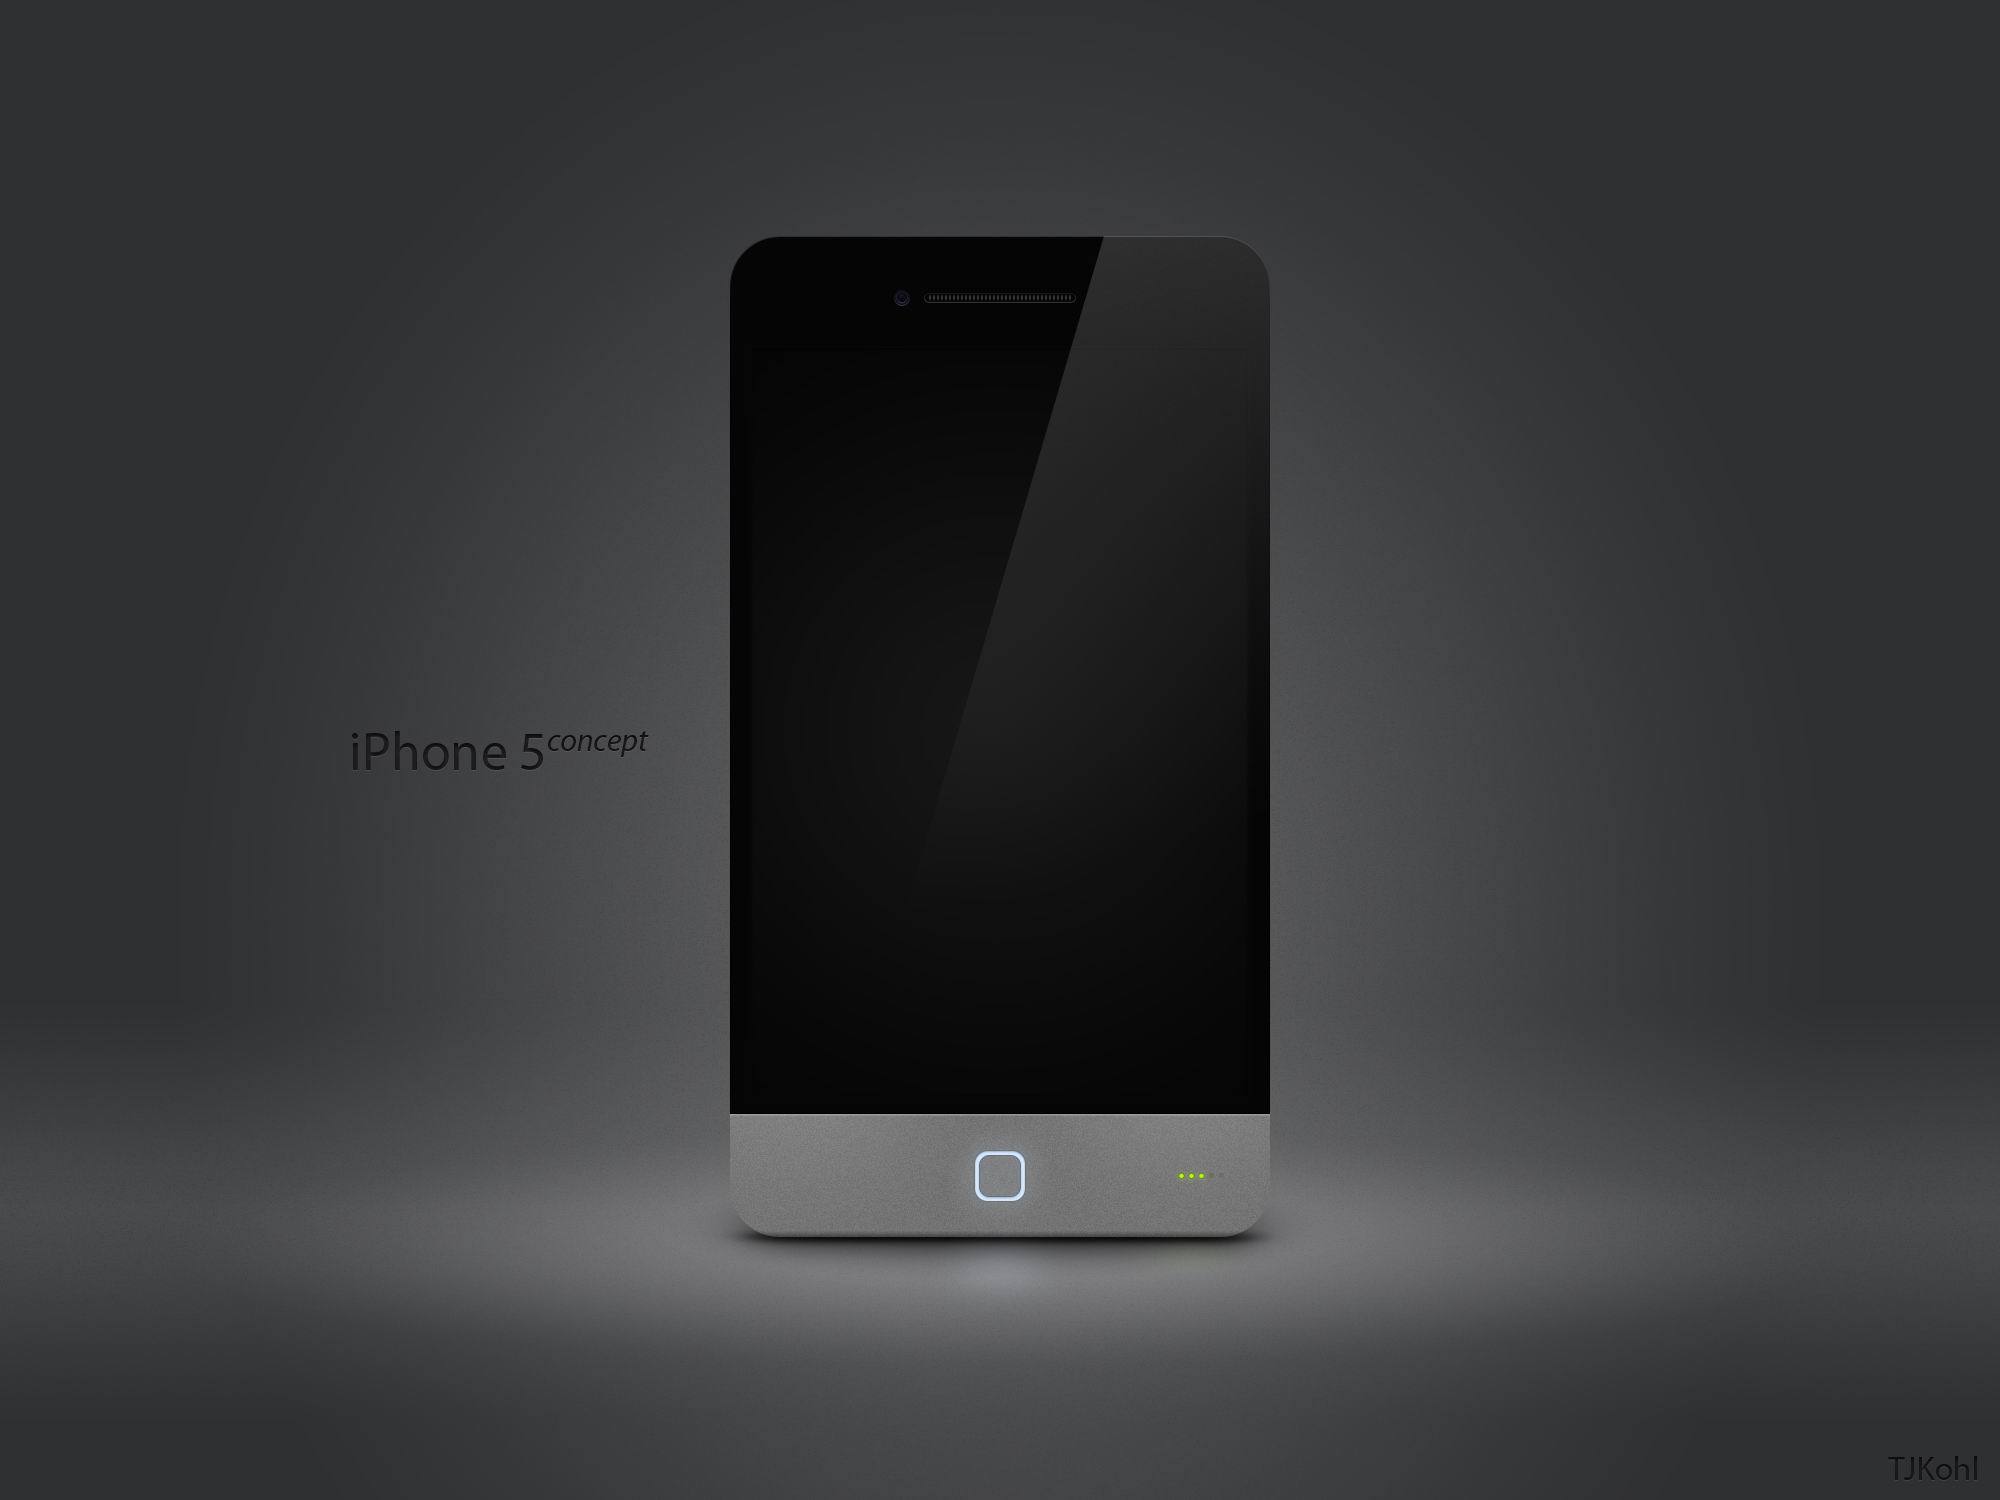 Iphone 5s concept wallpapers and images   wallpapers pictures photos